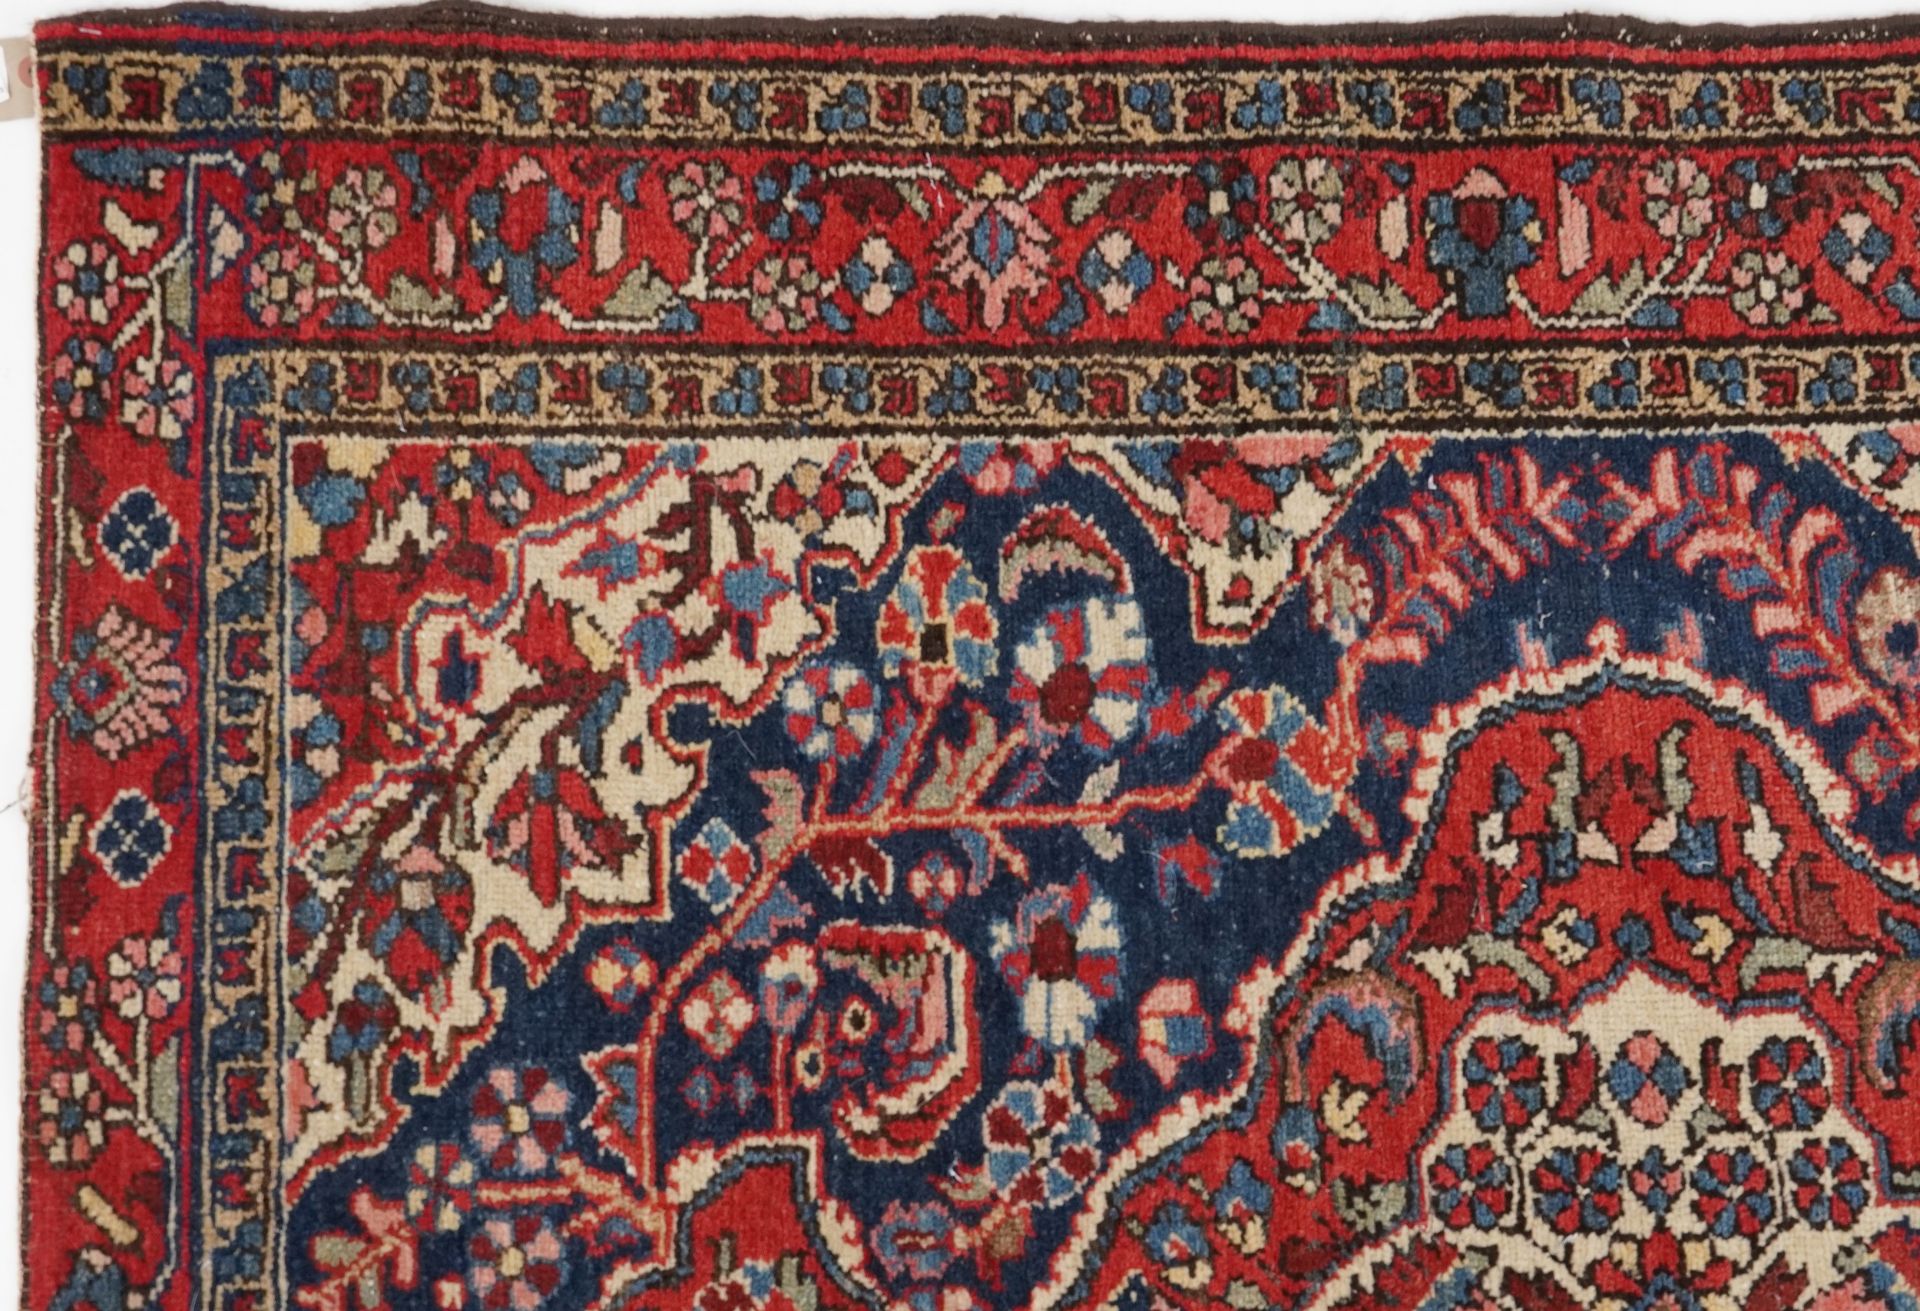 Rectangular Persian blue and red ground rug having and allover floral design, 146cm x 103cm : For - Image 2 of 5